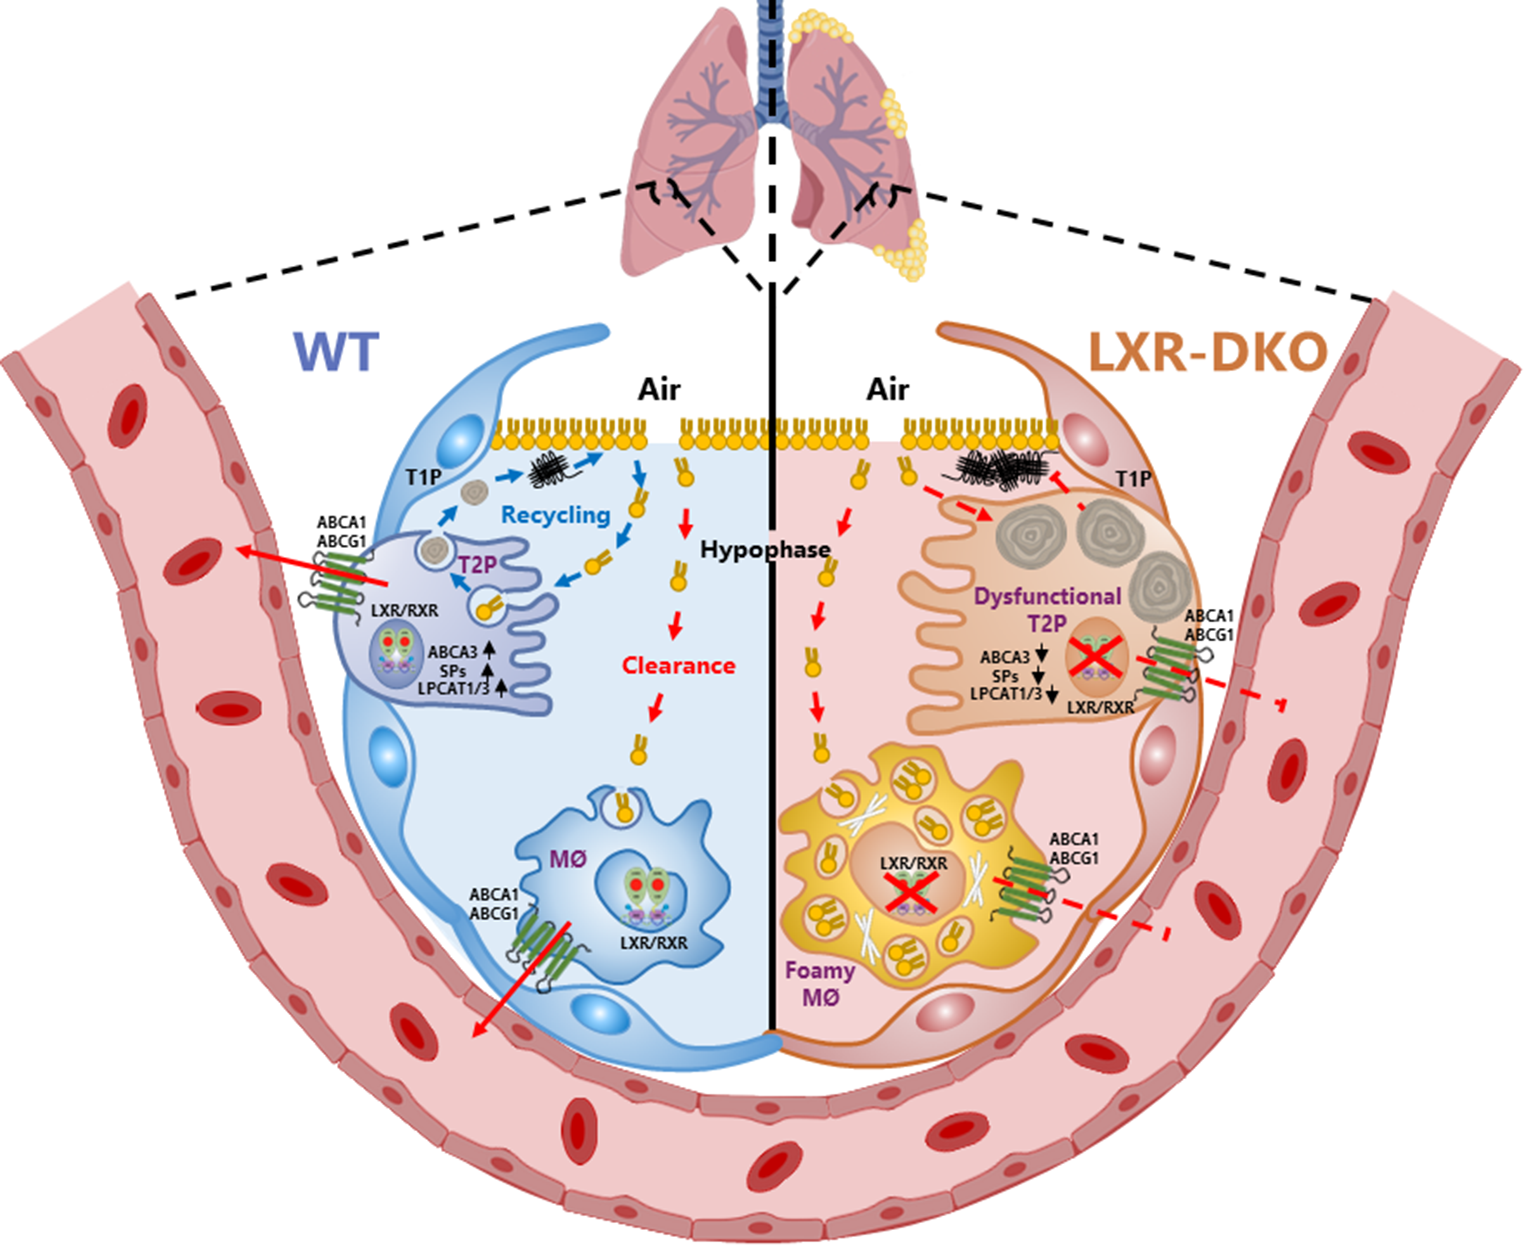 Endogenous LXR signaling controls pulmonary surfactant homeostasis and prevents lung inflammation